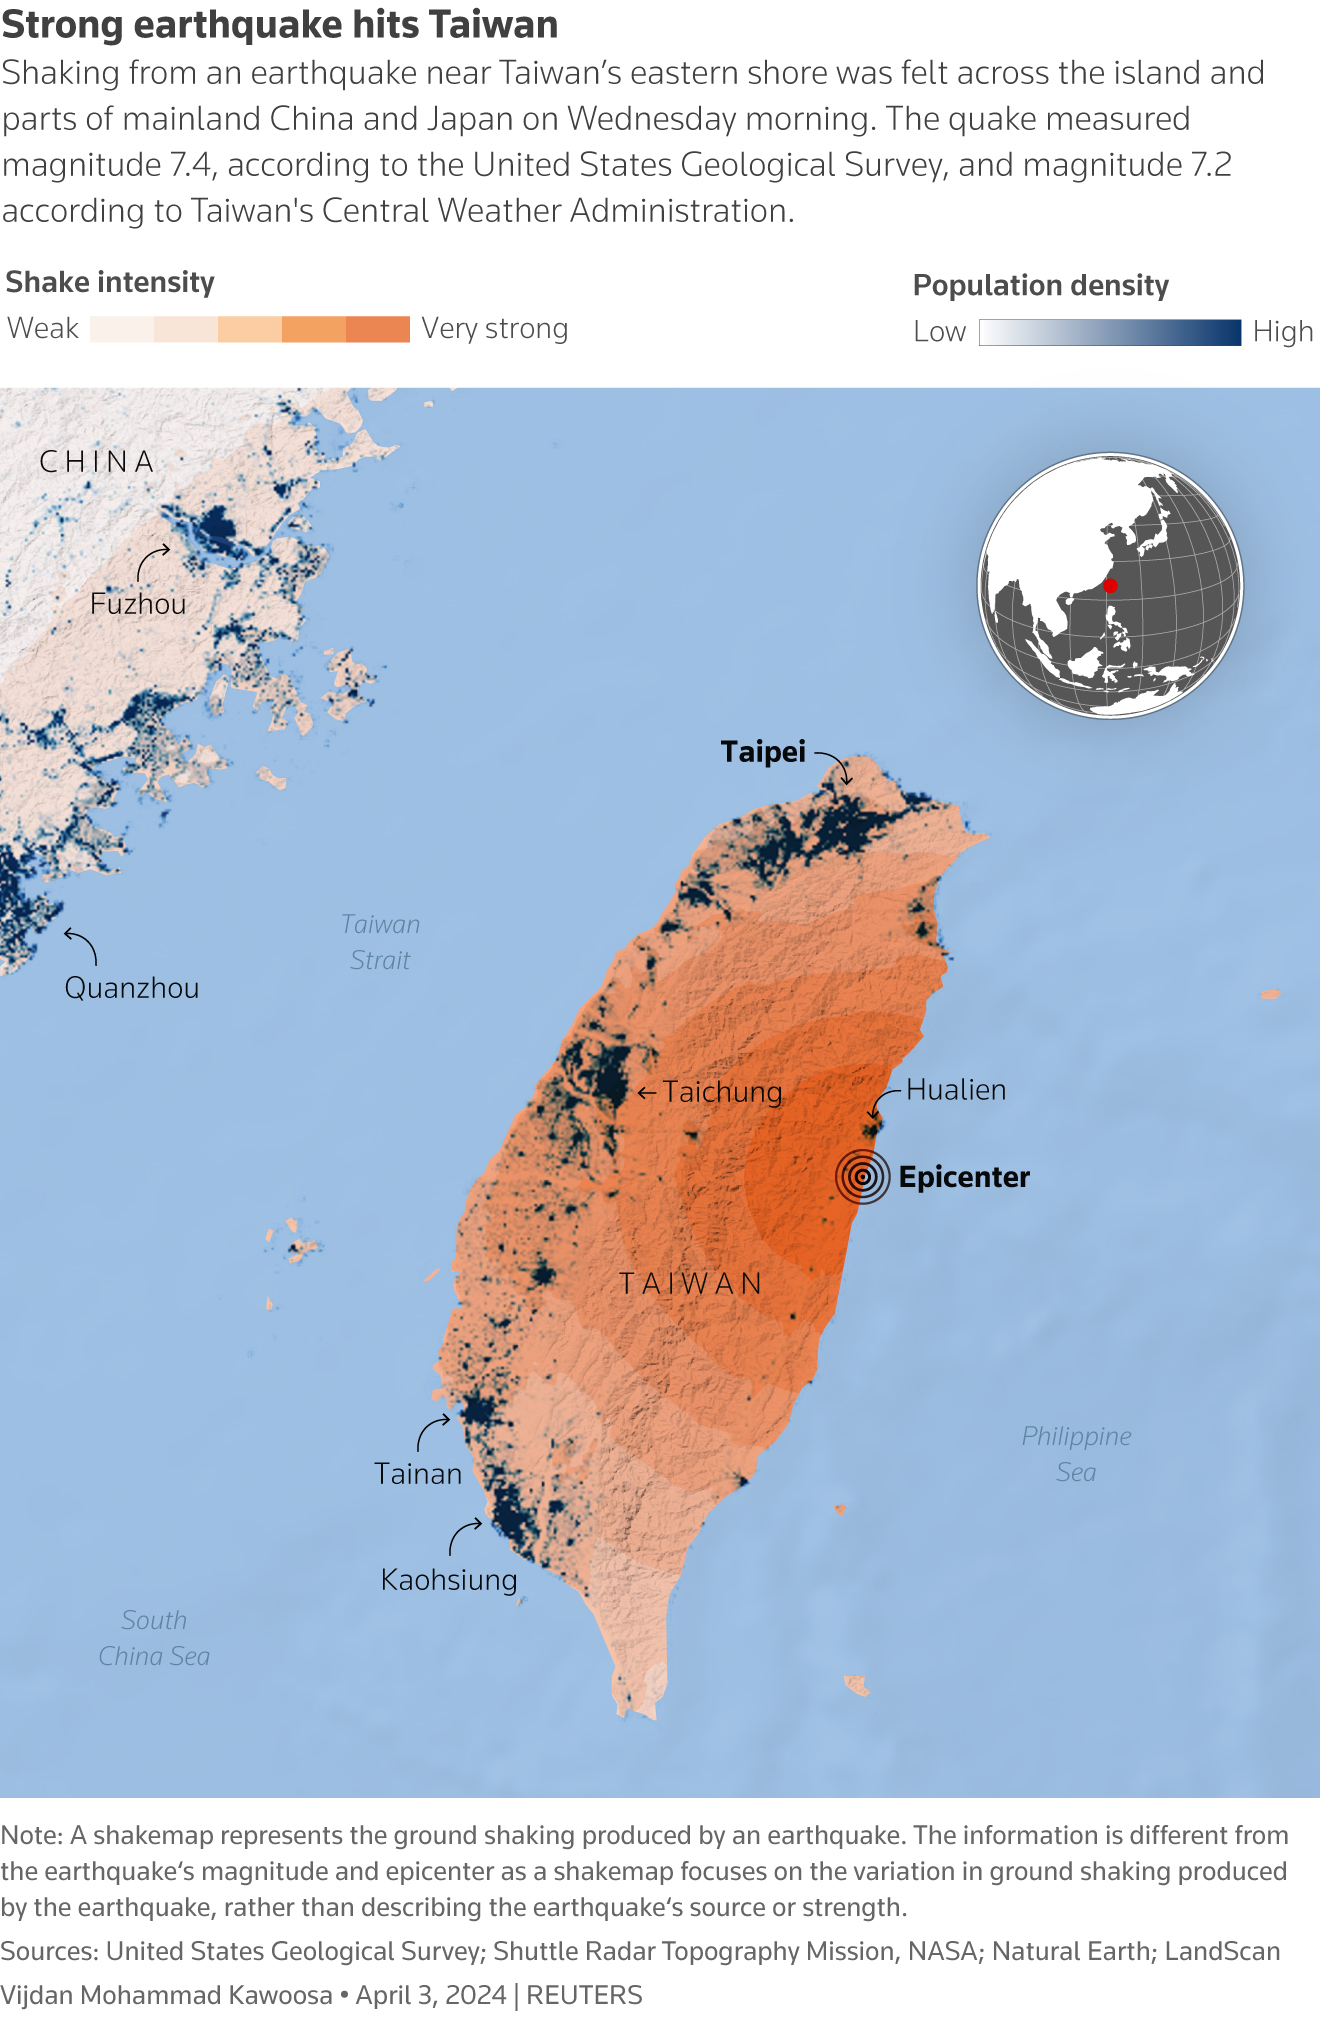 Shaking from an earthquake near Taiwan’s eastern shore was felt across the island nation and parts of mainland China and Japan on Wednesday morning.